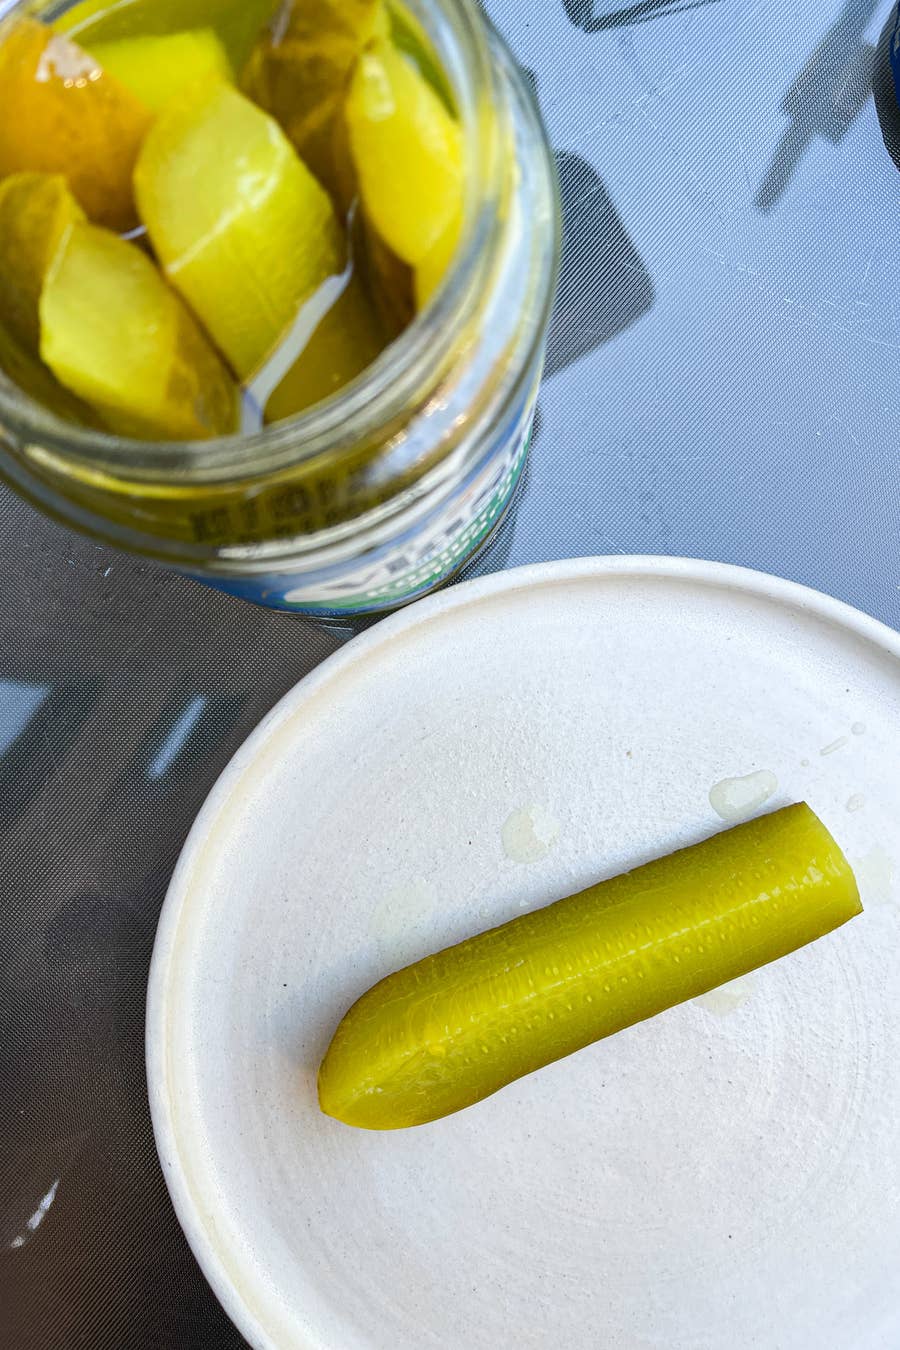 All the Wickles Pickles, Ranked